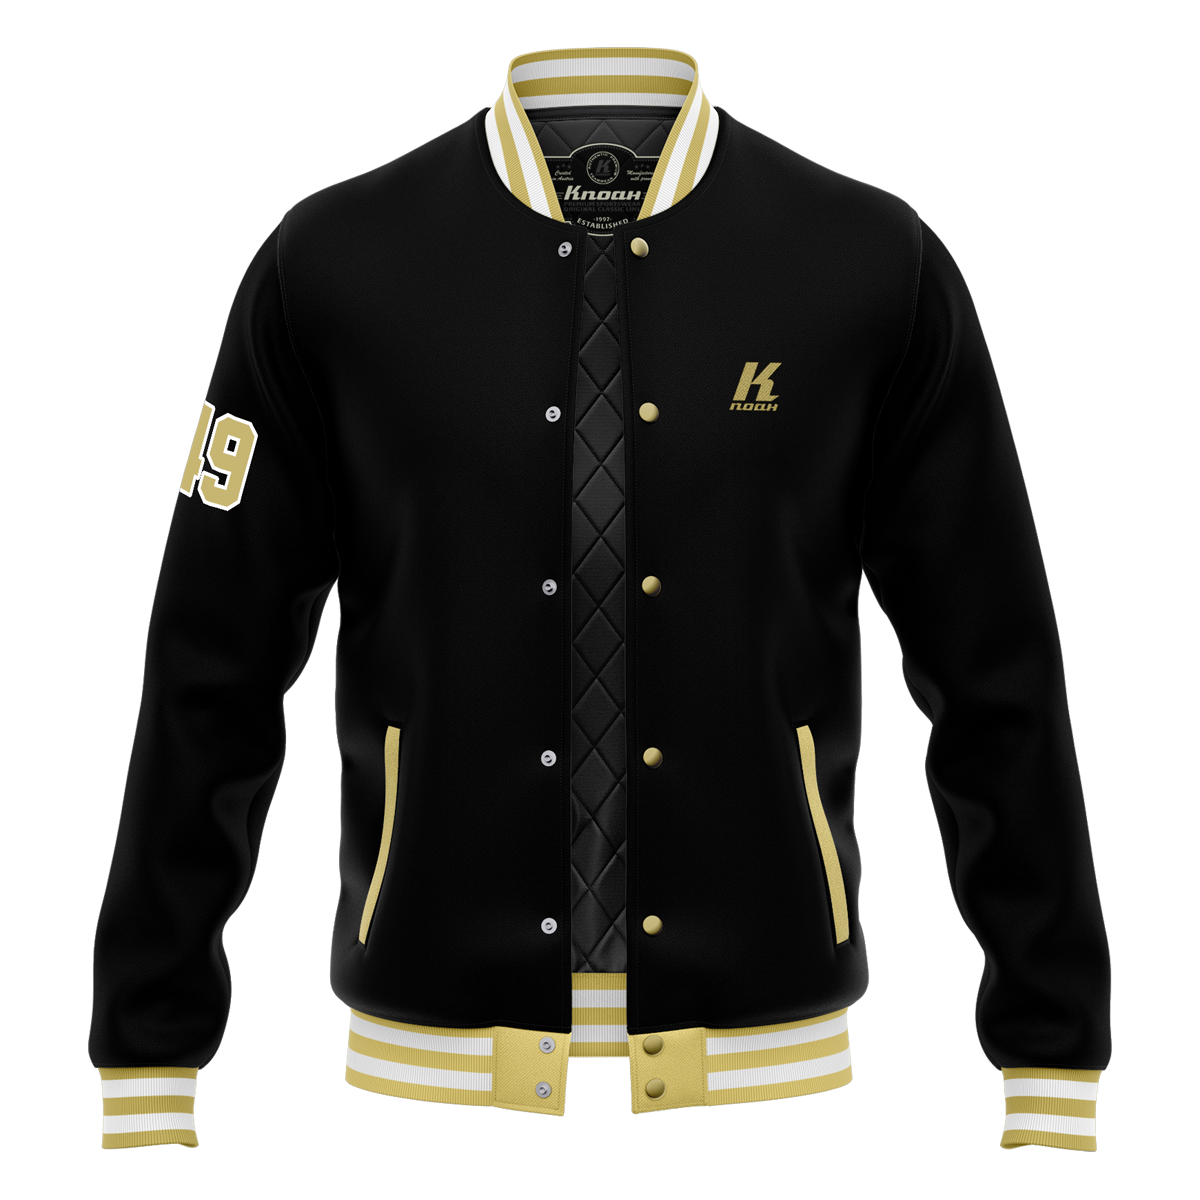 Day 8: "Royality" Authentic Varsity Jacket with Playernumber/Initials